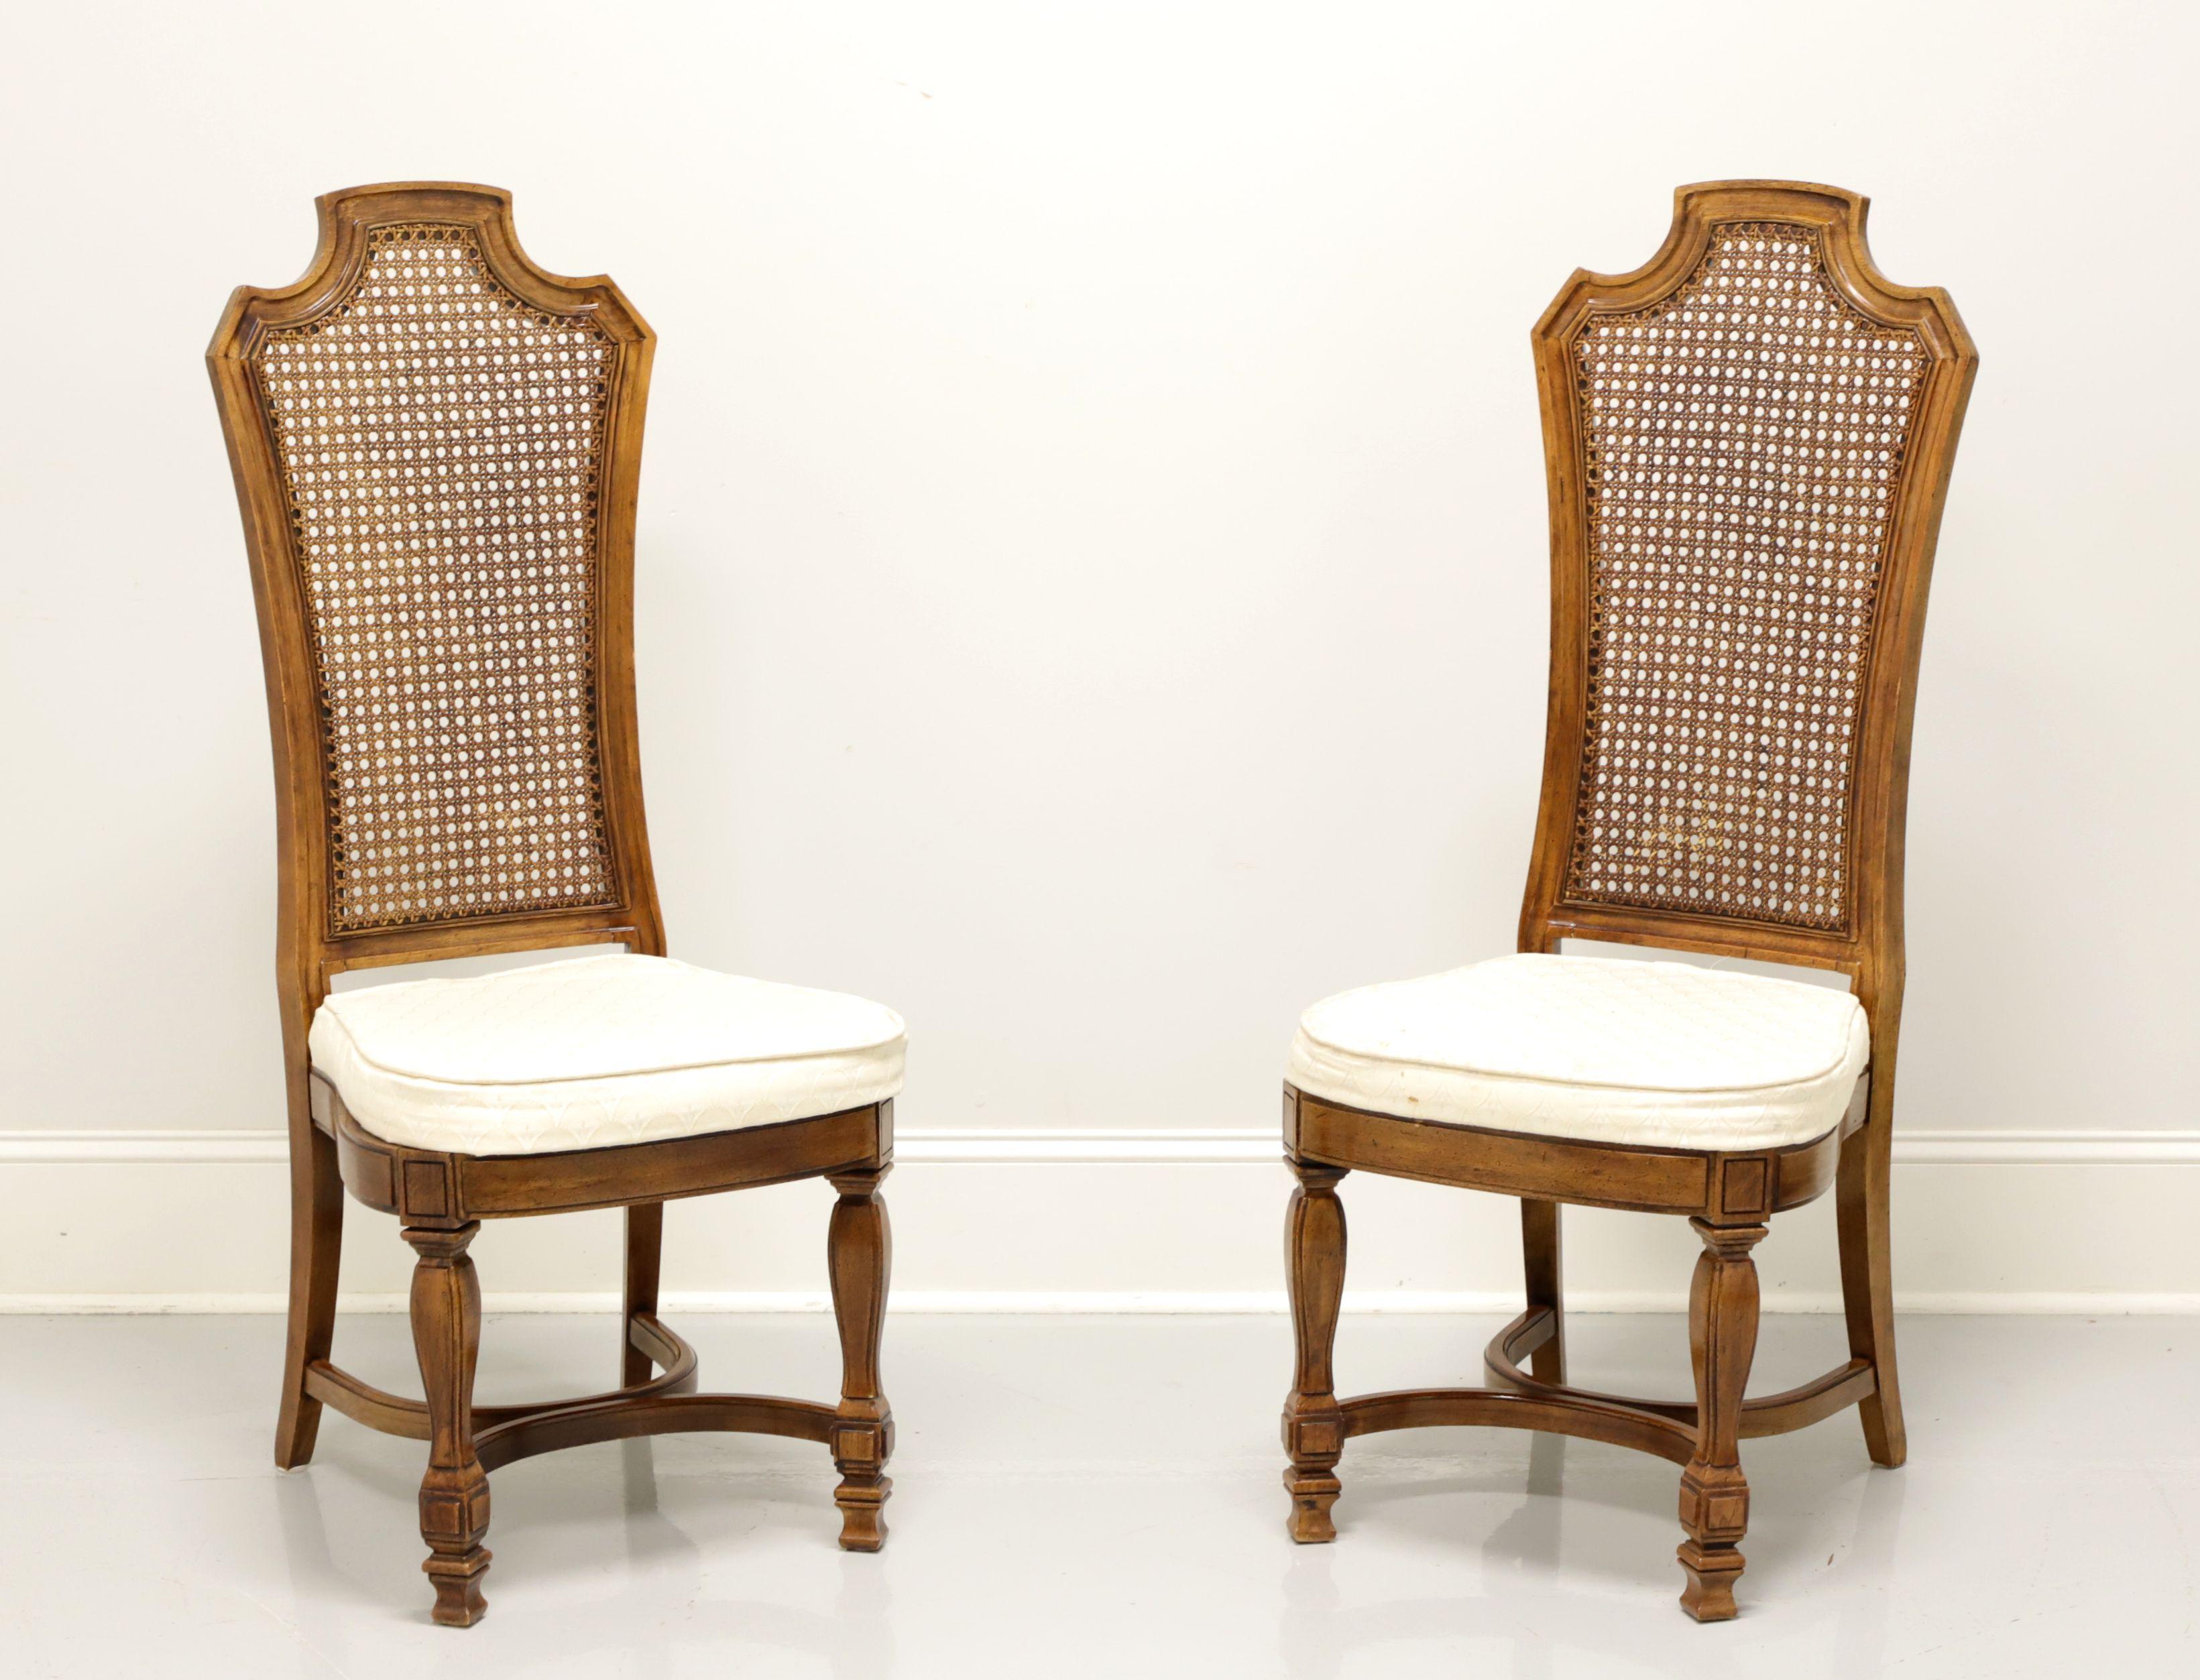 THOMASVILLE Ceremony Collection Mediterranean Walnut Dining Side Chairs - Pair A 1